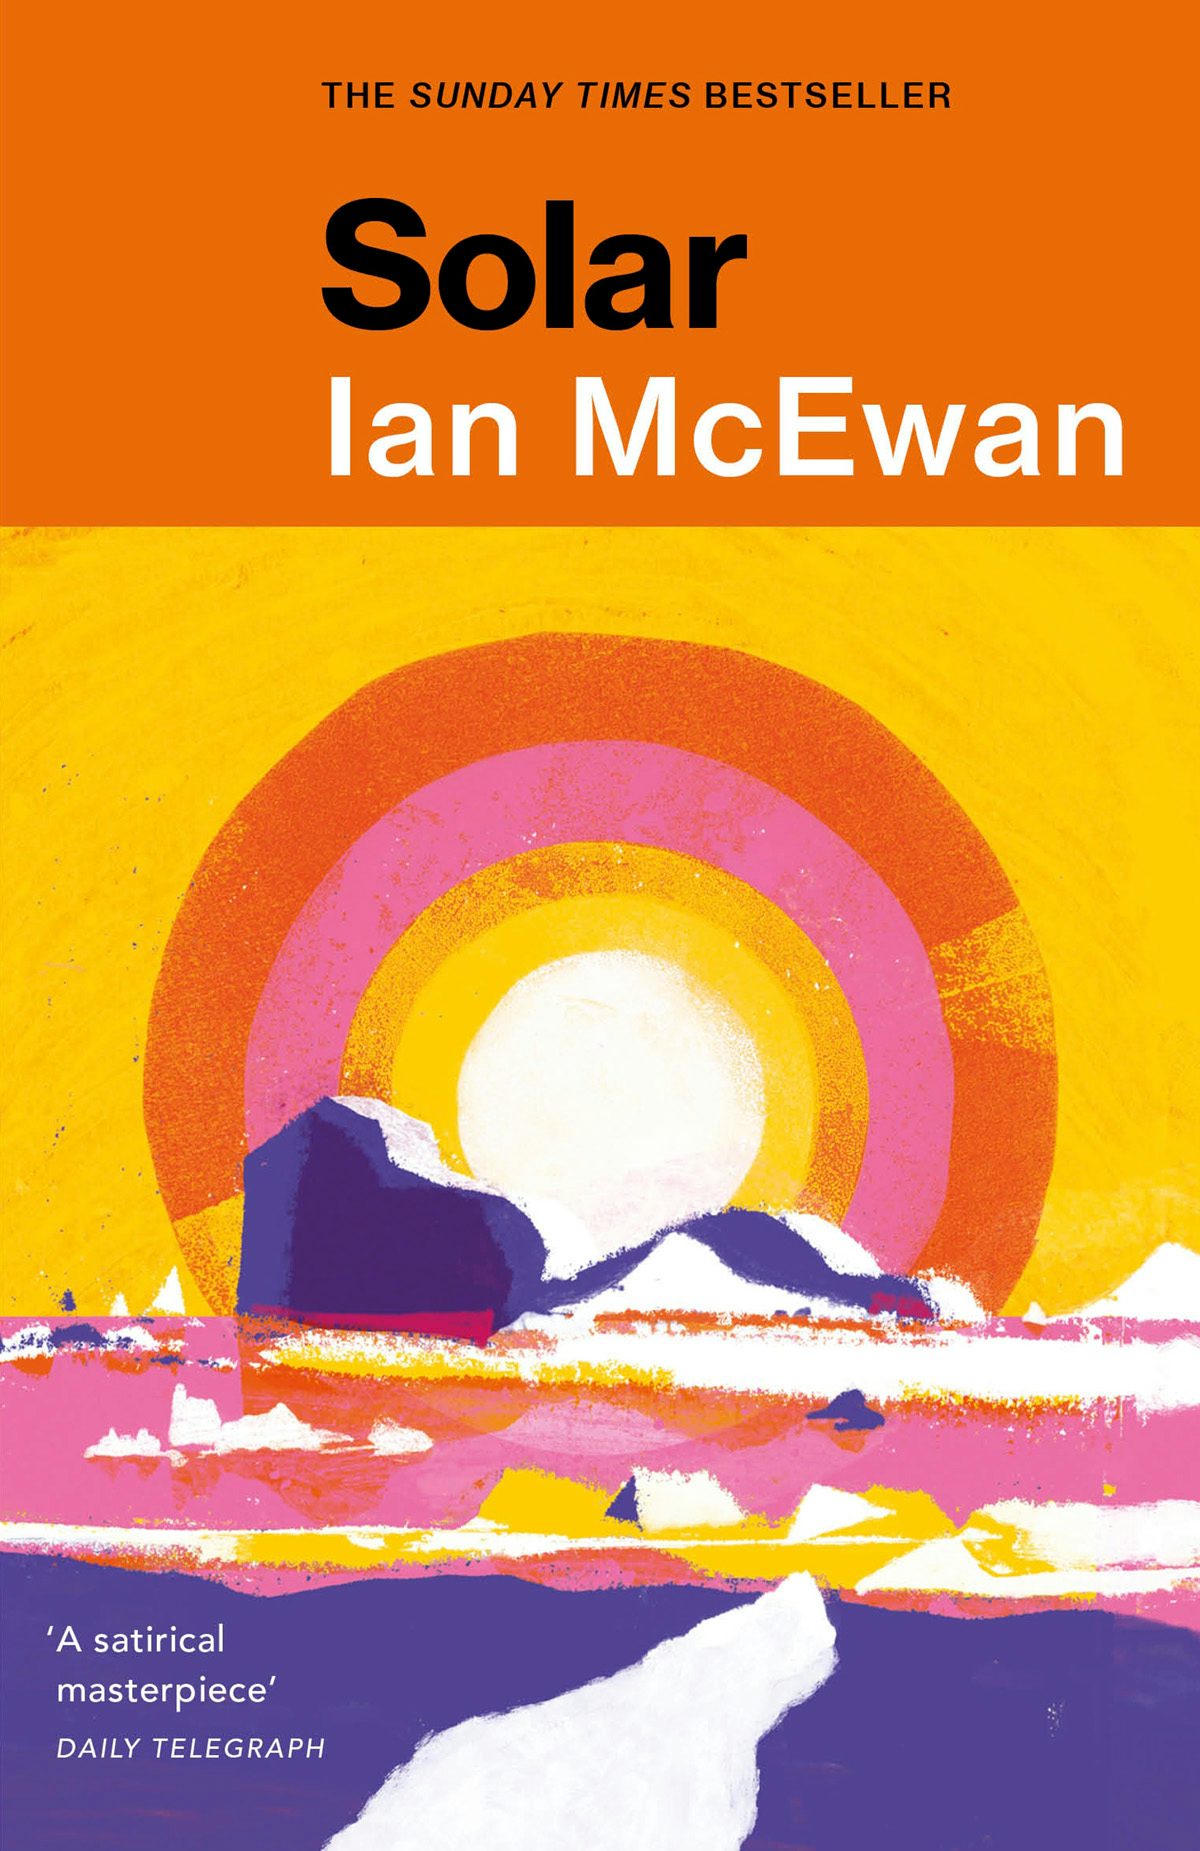 Cover of Solar by Ian McEwan showing a psychedelic graphic of a seascape against a sun motif represented in yellow, pink and orange concentric circles